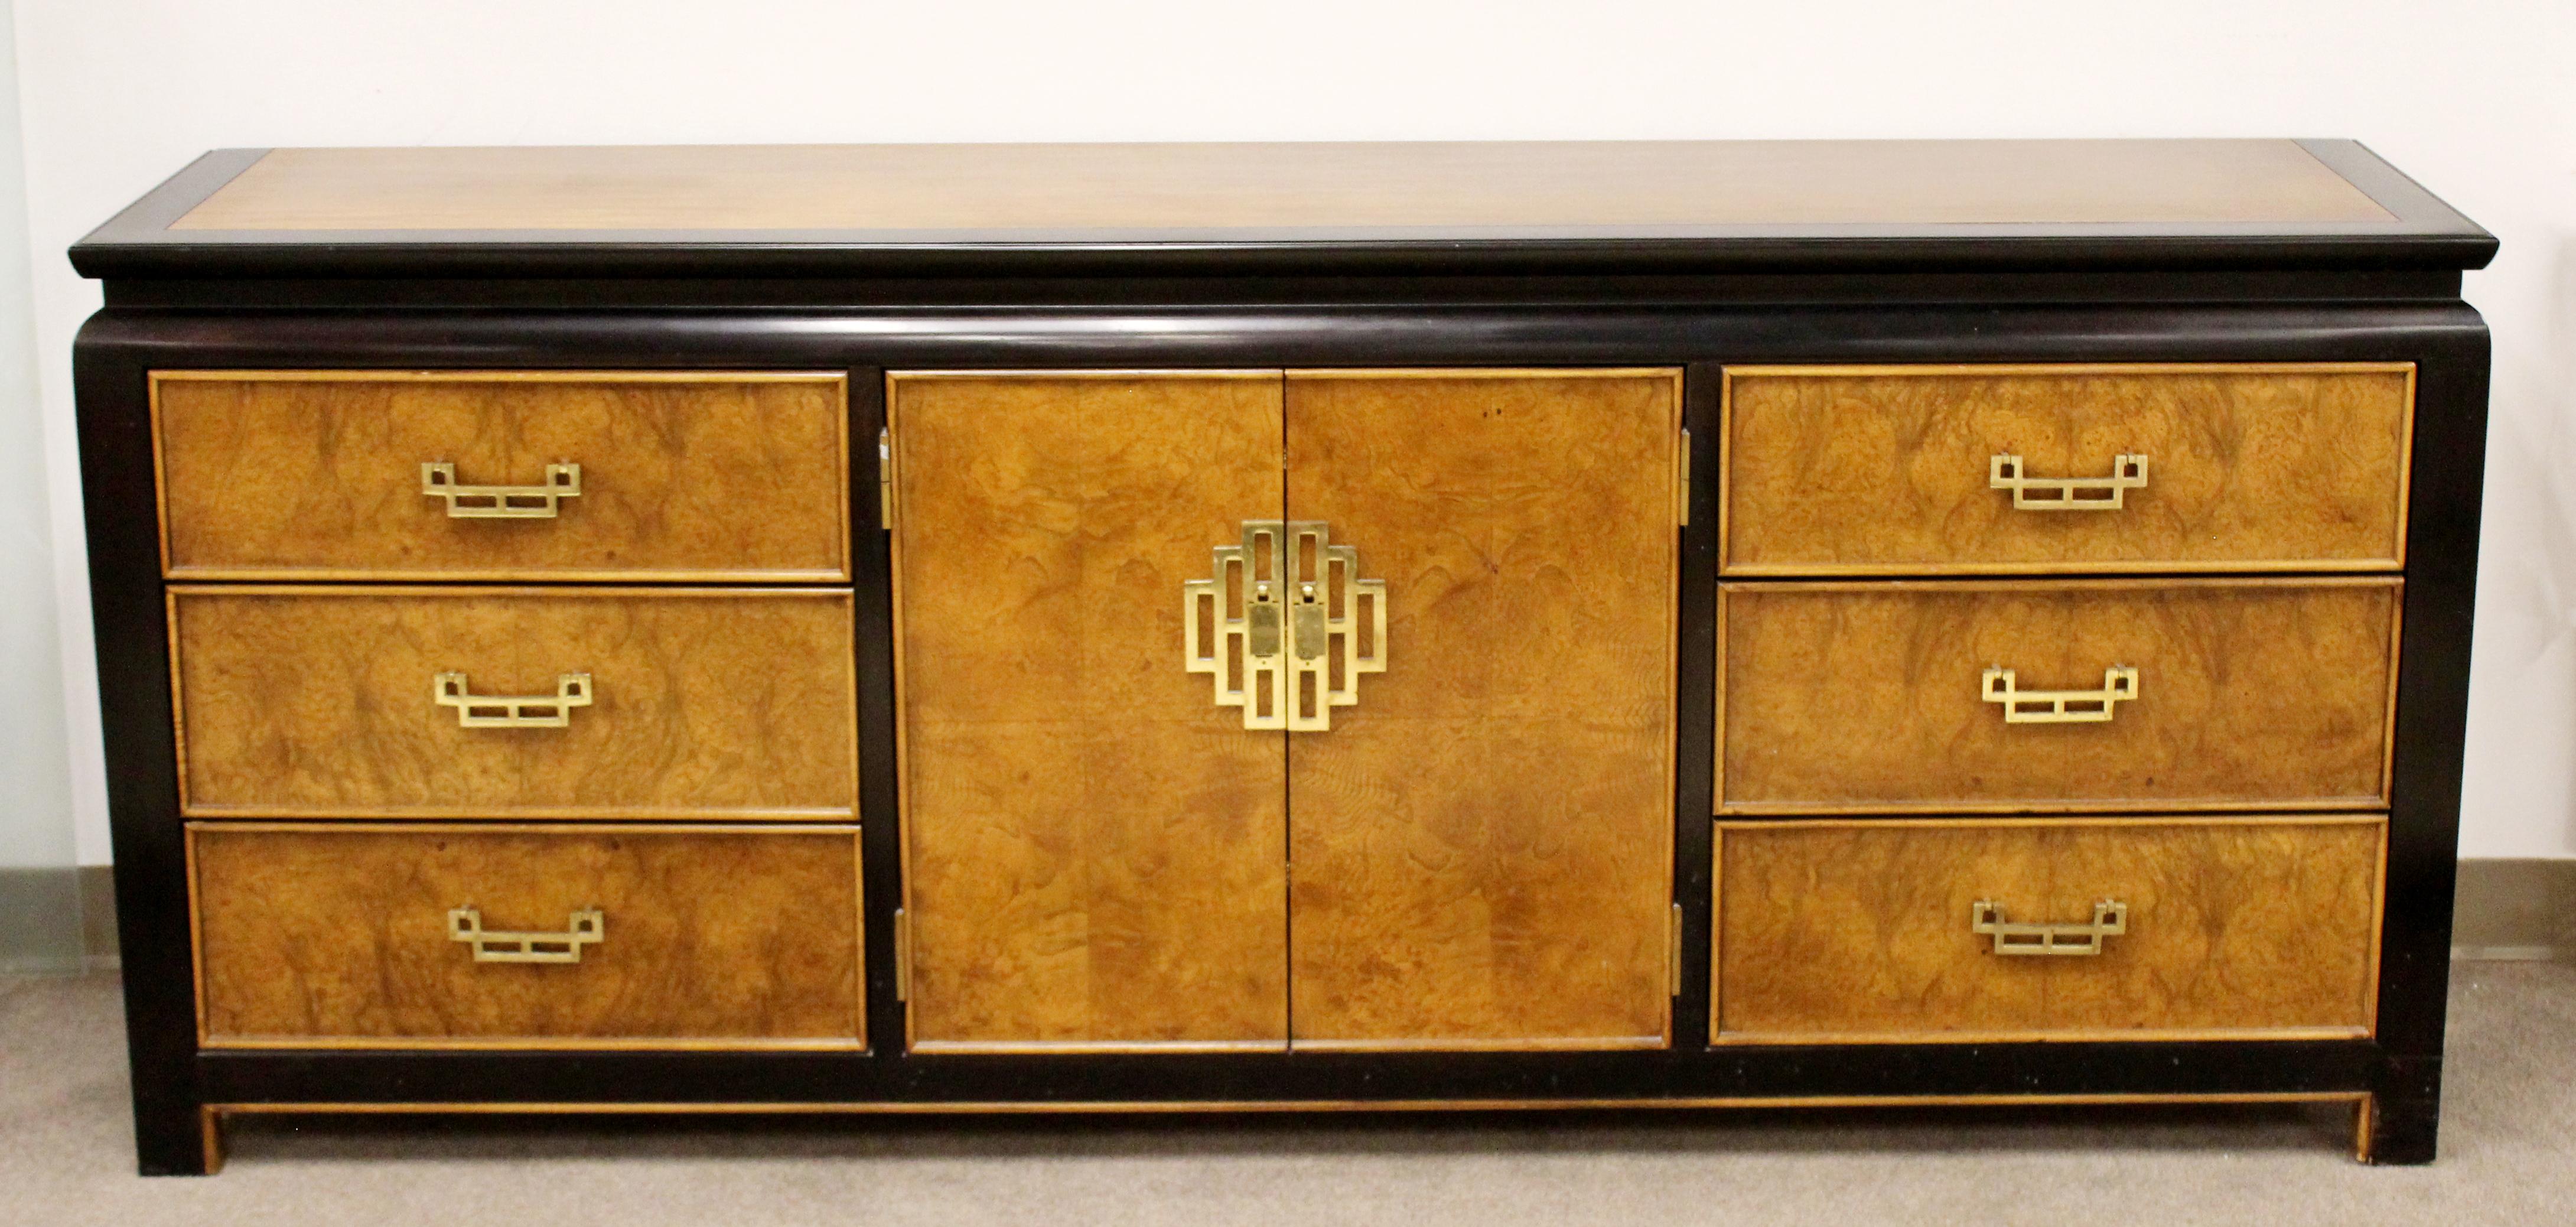 For your consideration is a luxe looking, Chin Hua oriental style dresser credenza sideboard, made of burl wood and brass, with nine drawers, by Century Furniture, circa 1970s. In excellent vintage condition. The dimensions are 76